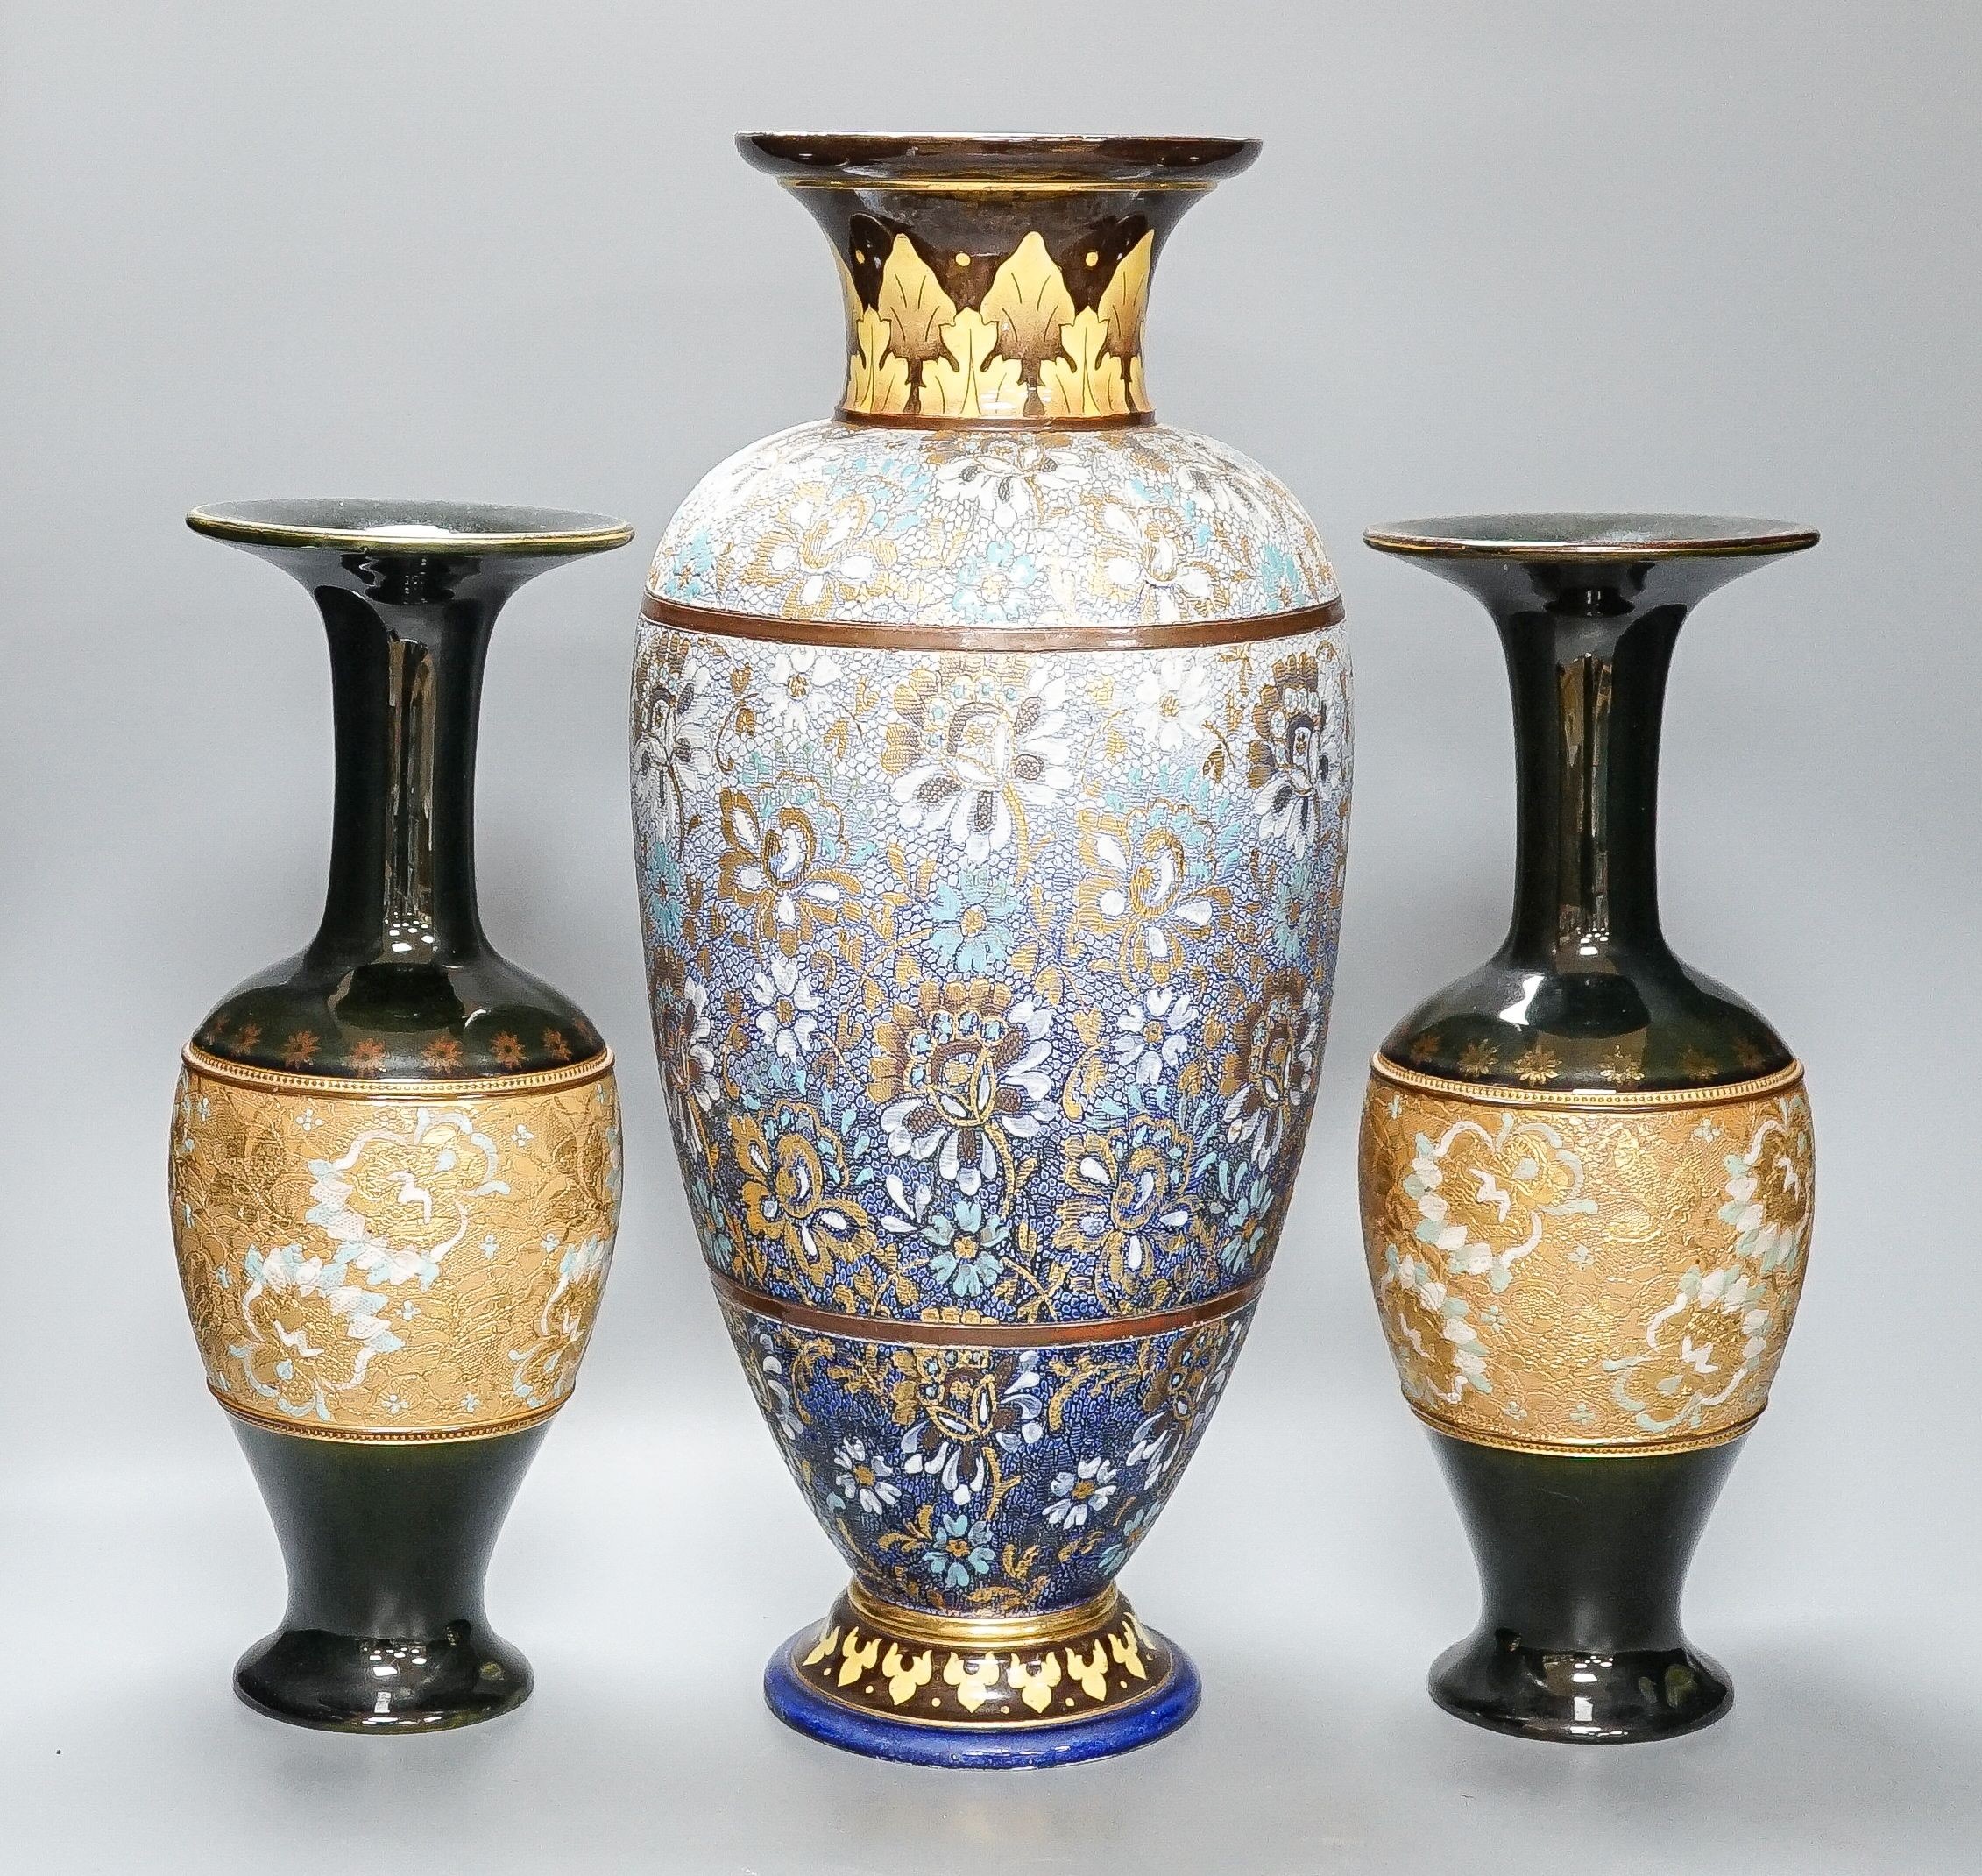 A large Doulton Slater's Patent vase, 46cm and a pair of similar smaller vases, 34cm